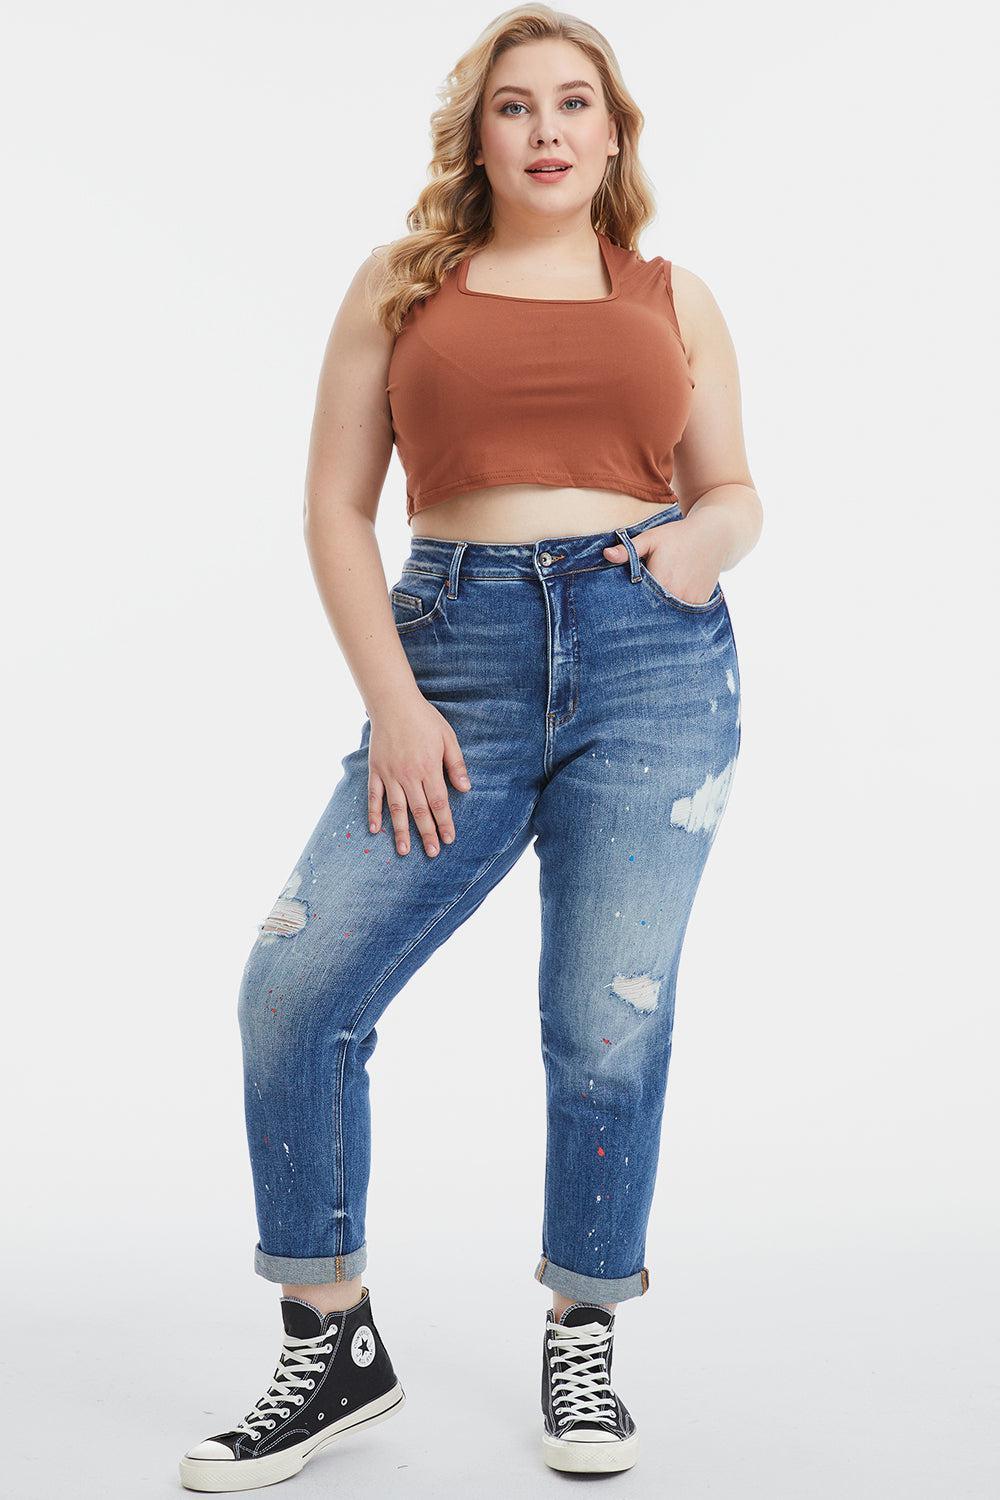 a woman in a crop top and ripped jeans